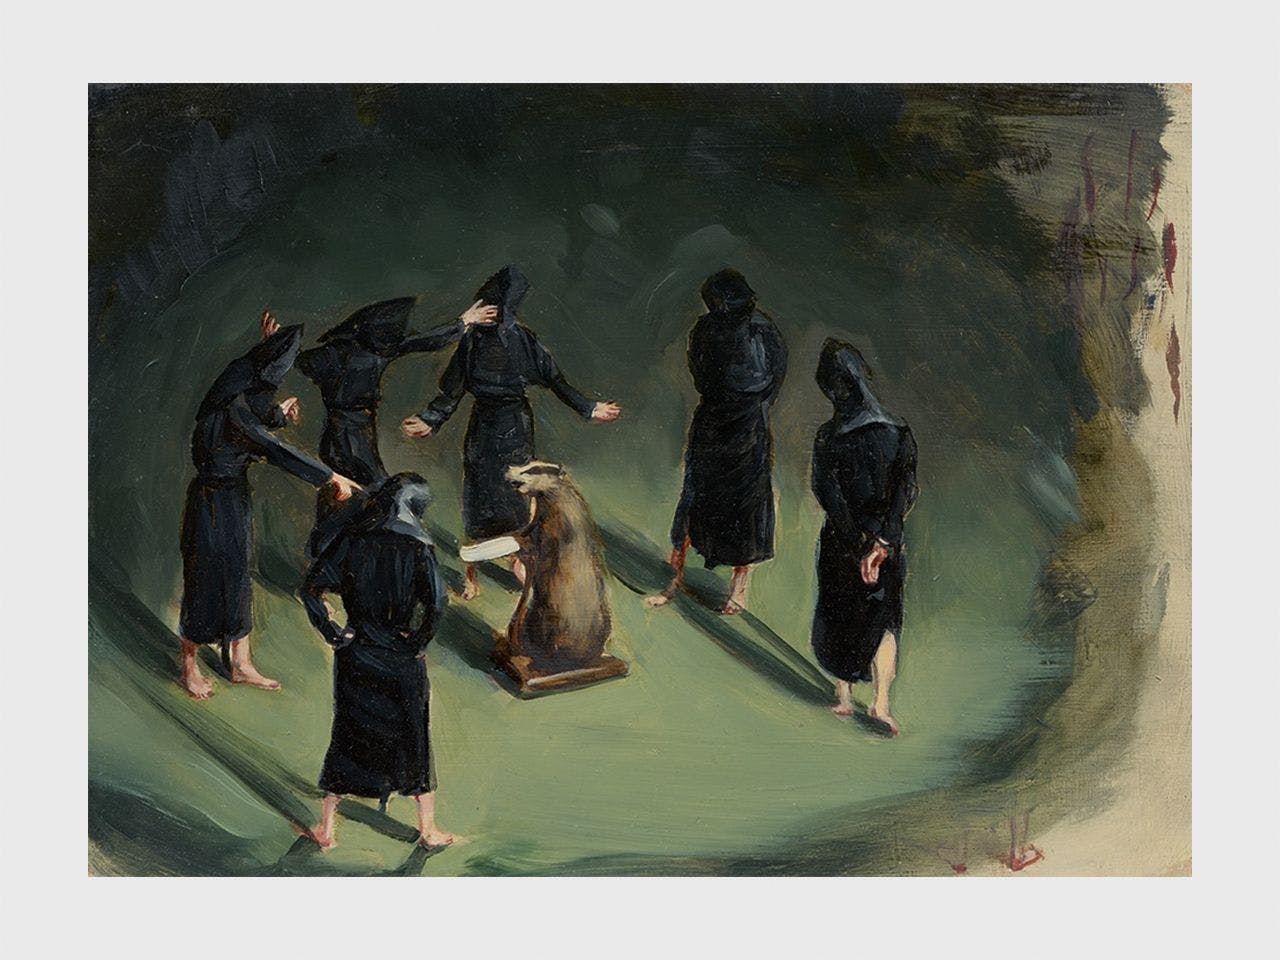 An artwork by Michael Borremans, titled Black Mould / The Badger's Song, dated 2015